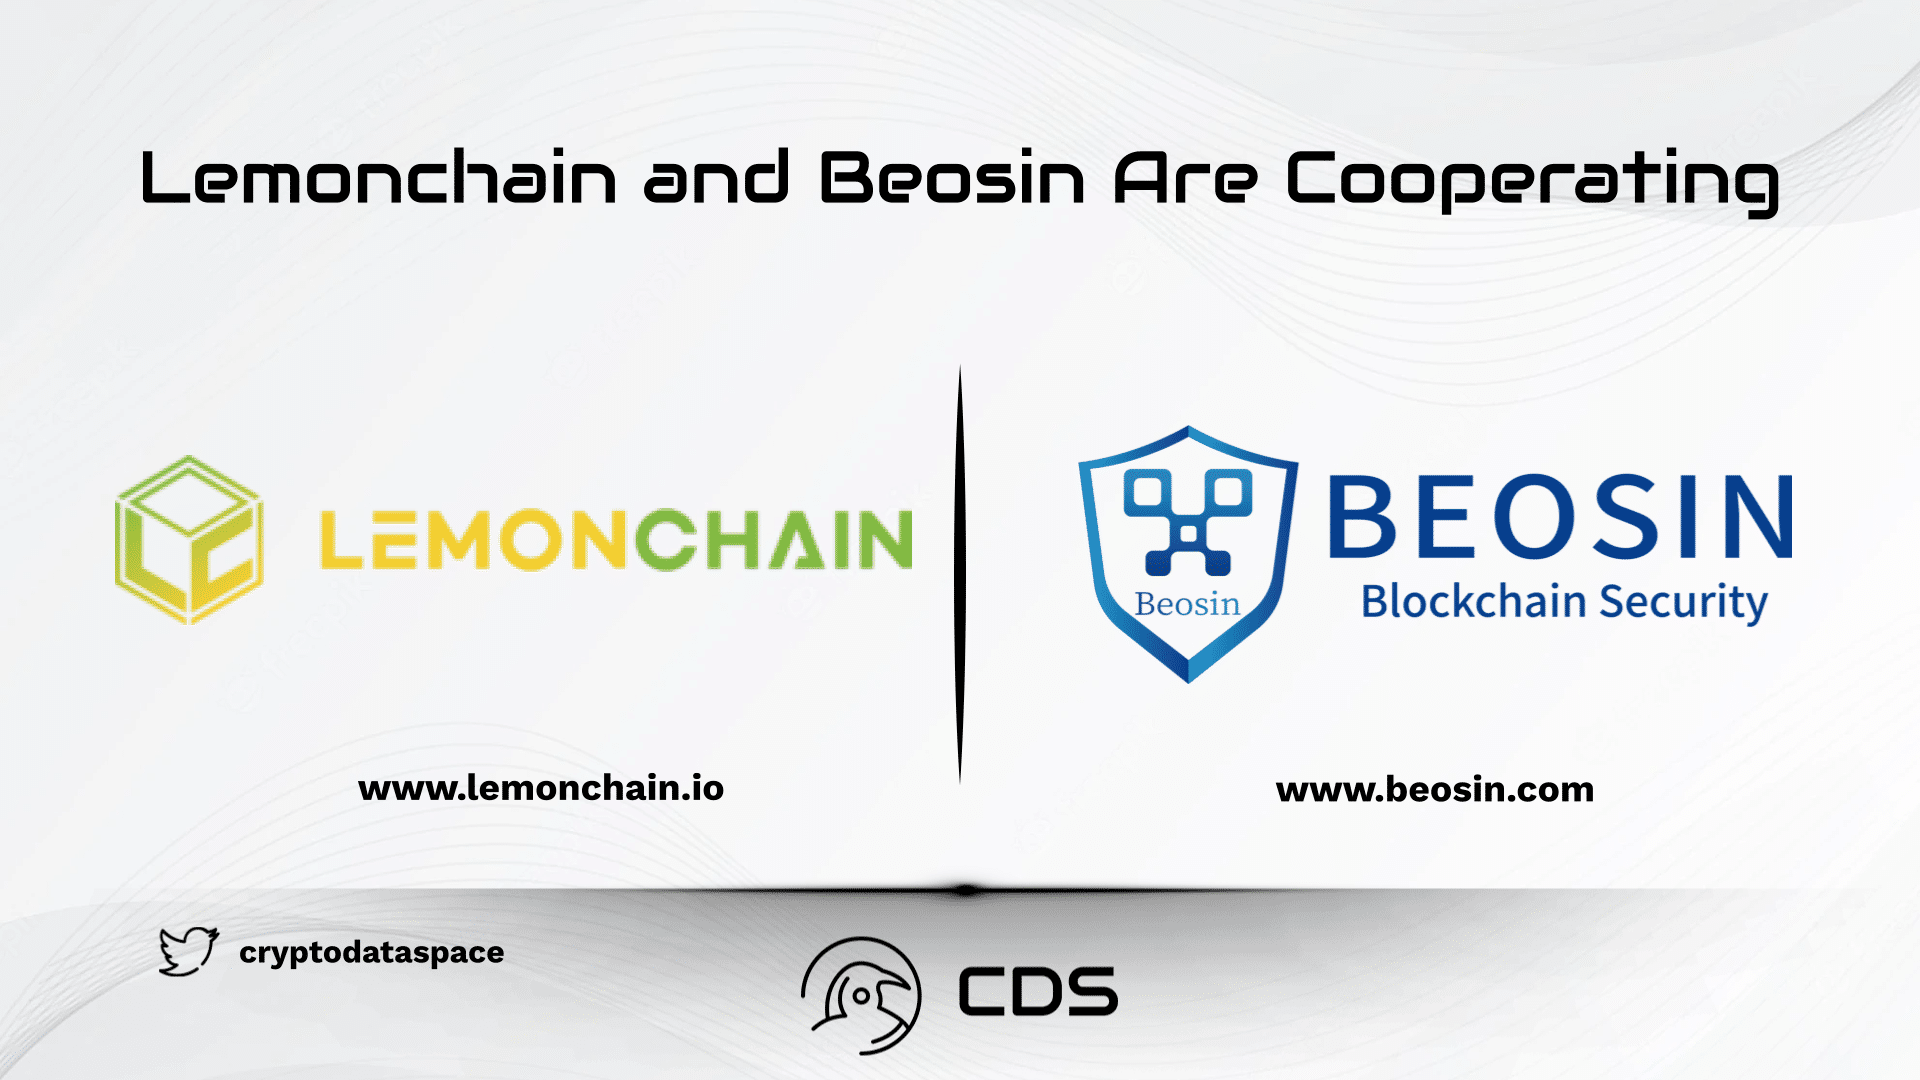 Lemonchain and Beosin Are Cooperating